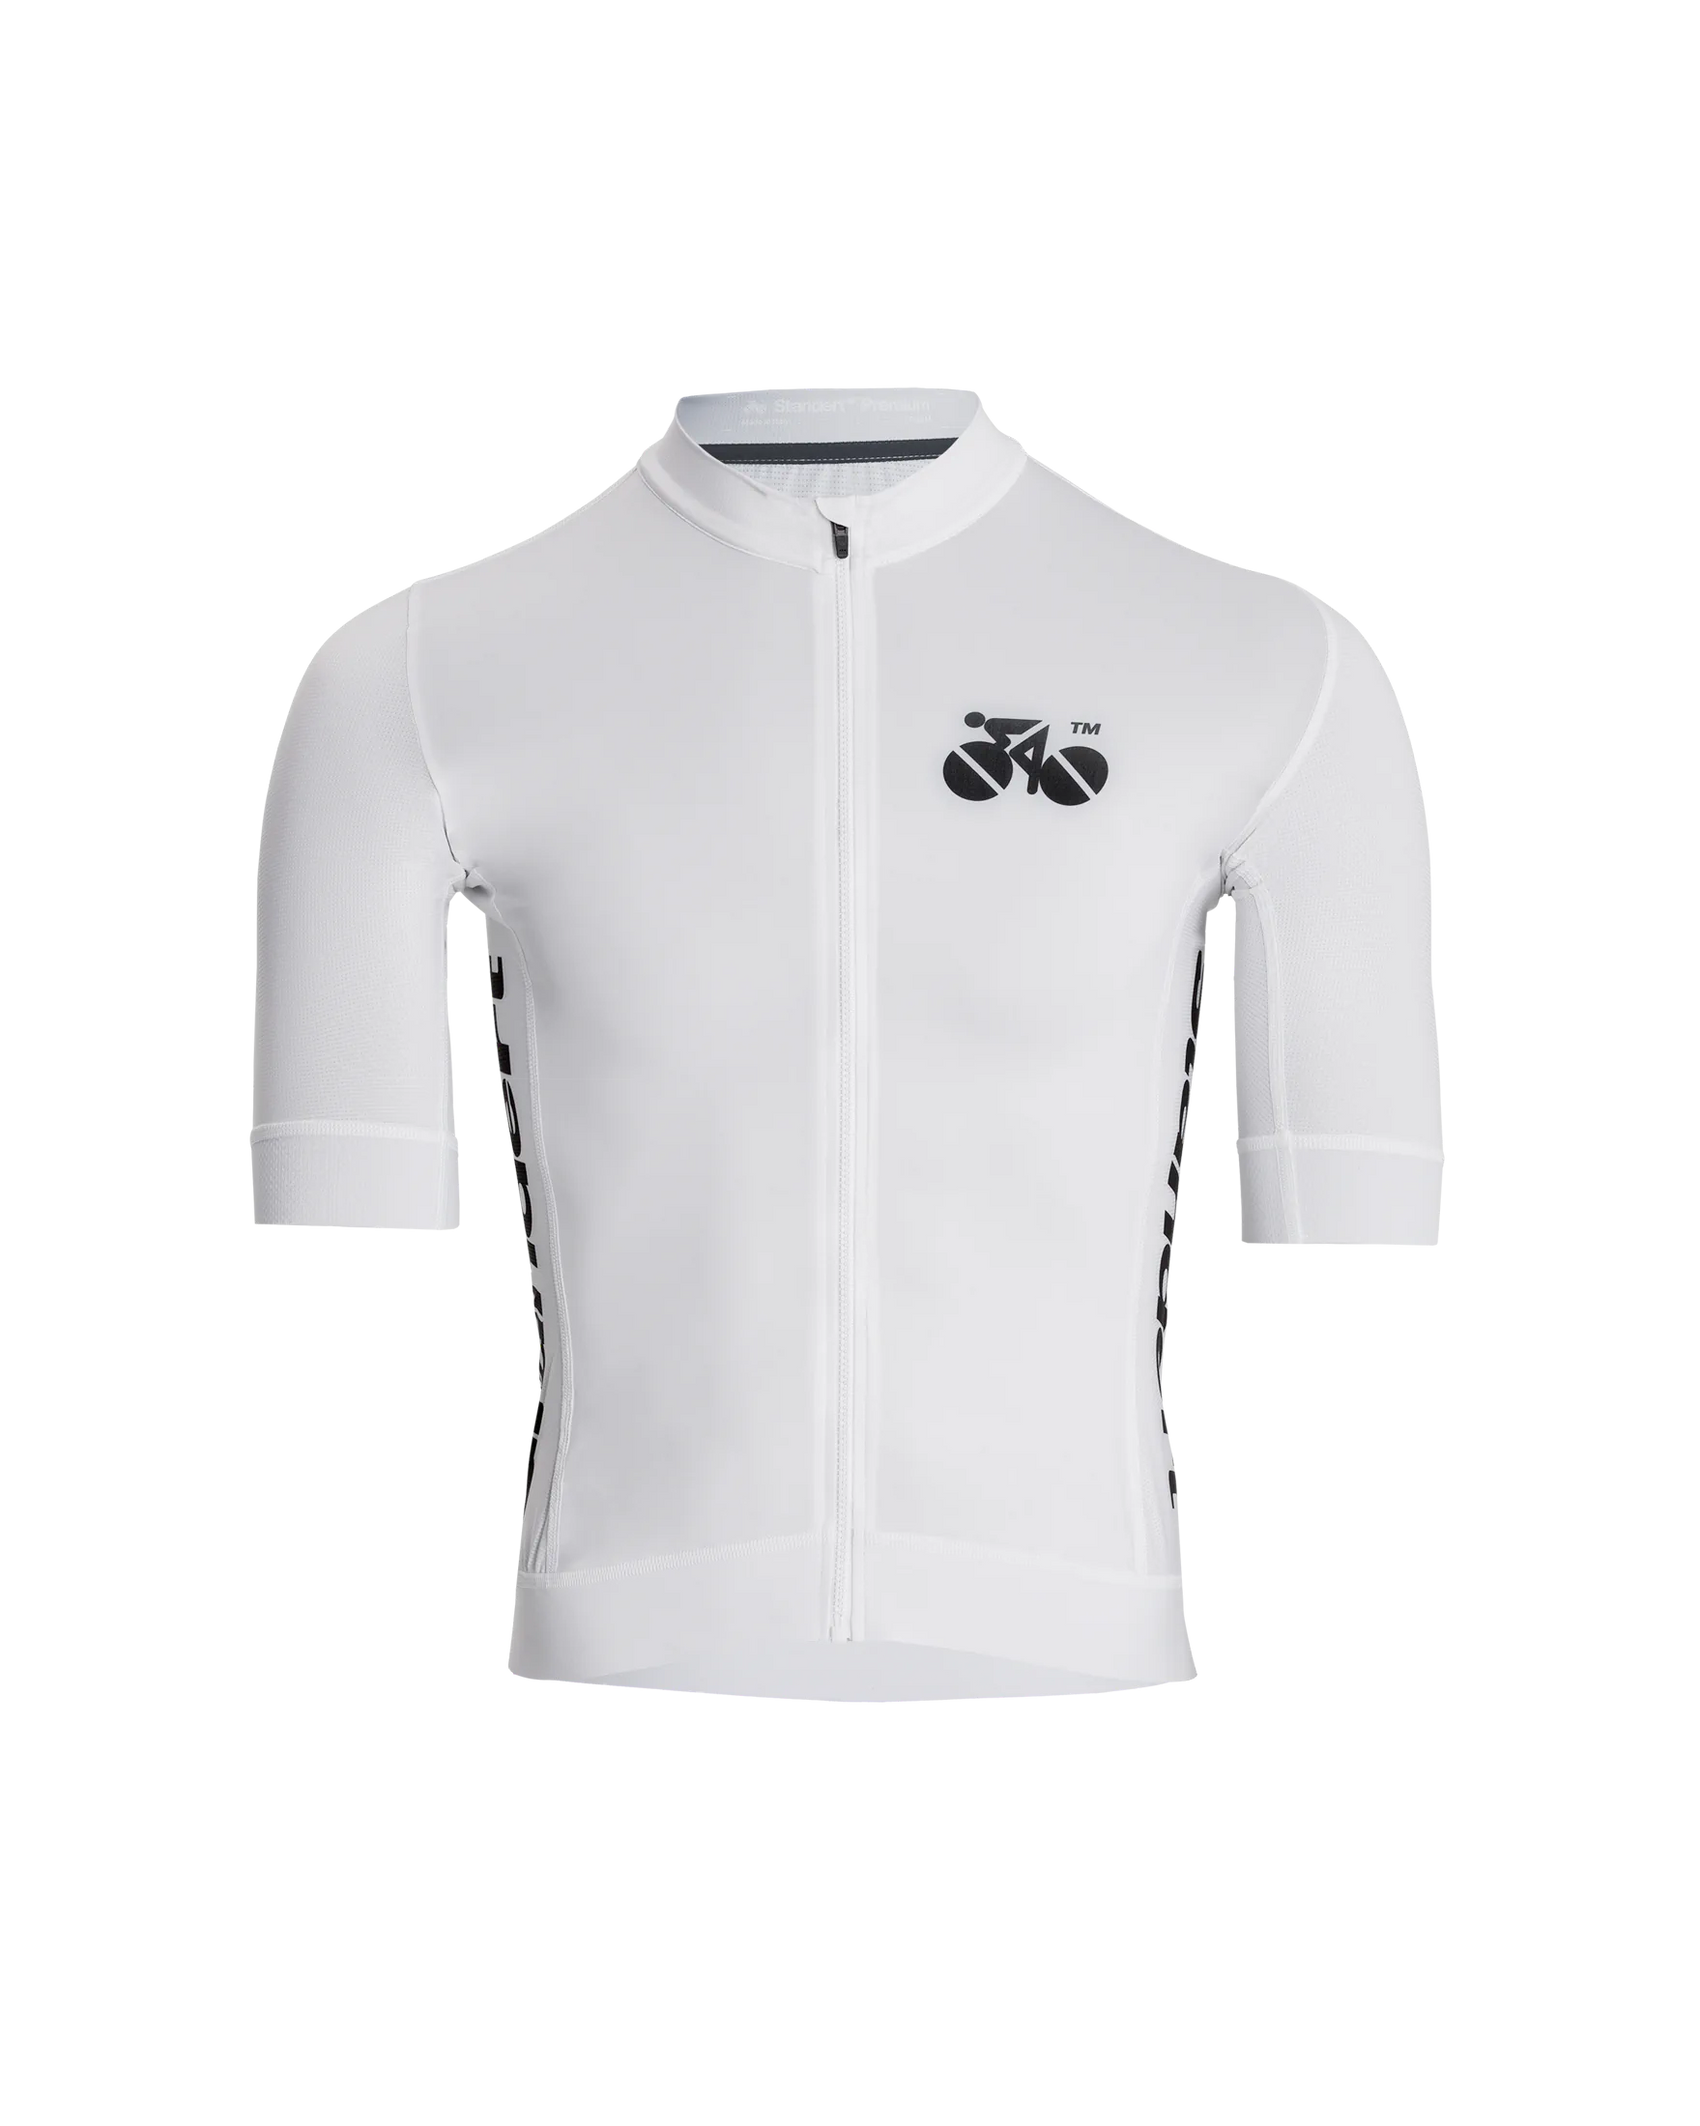 Premium RS Cycling Jersey | White | Designed for Racing